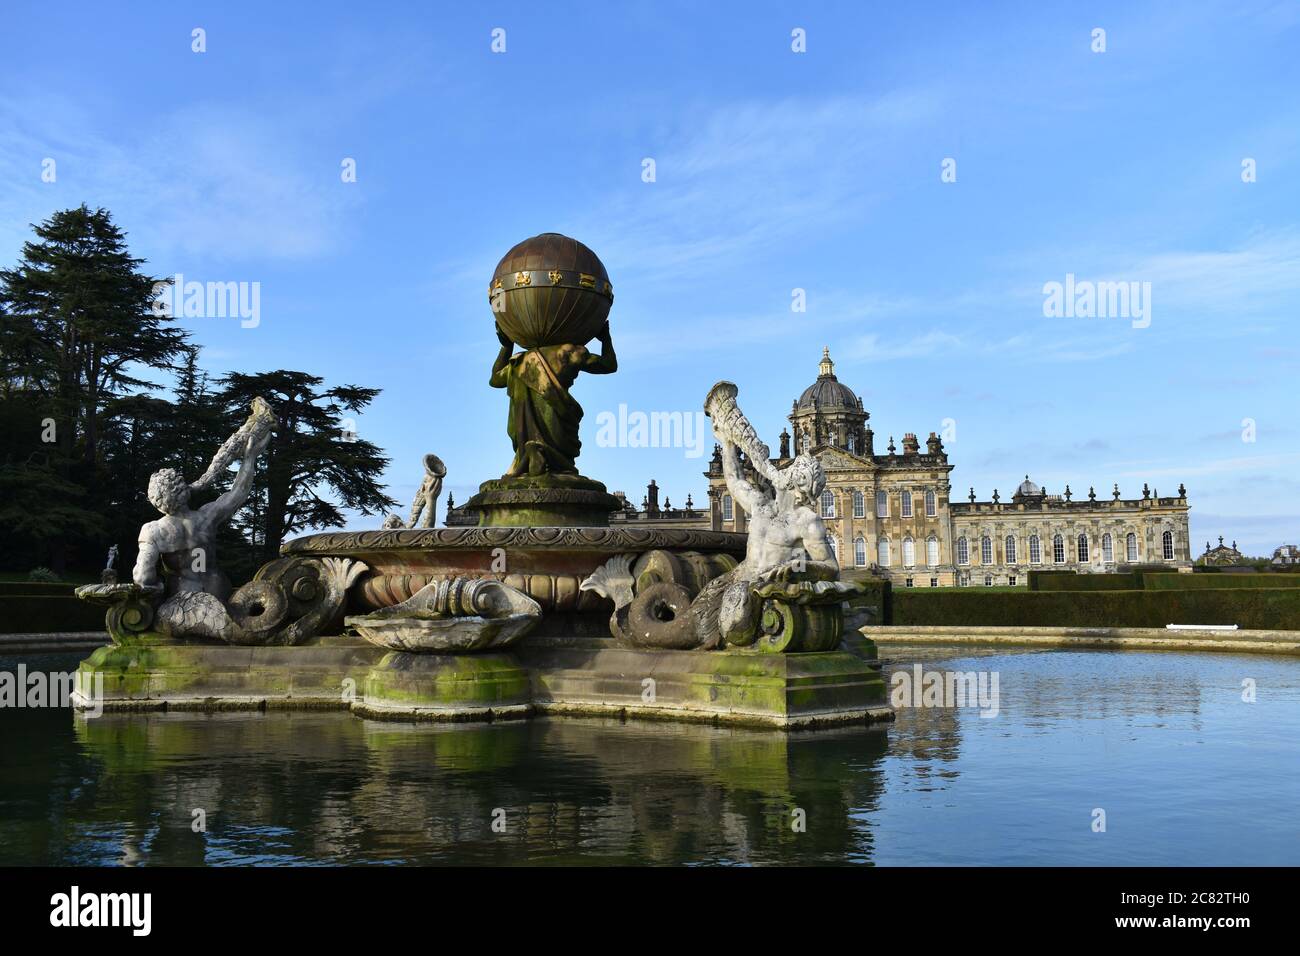 The Atlas Fountain in front of the South Front of Castle Howard in North Yorkshire, England. Reflections of the house and fountain in the water. Stock Photo